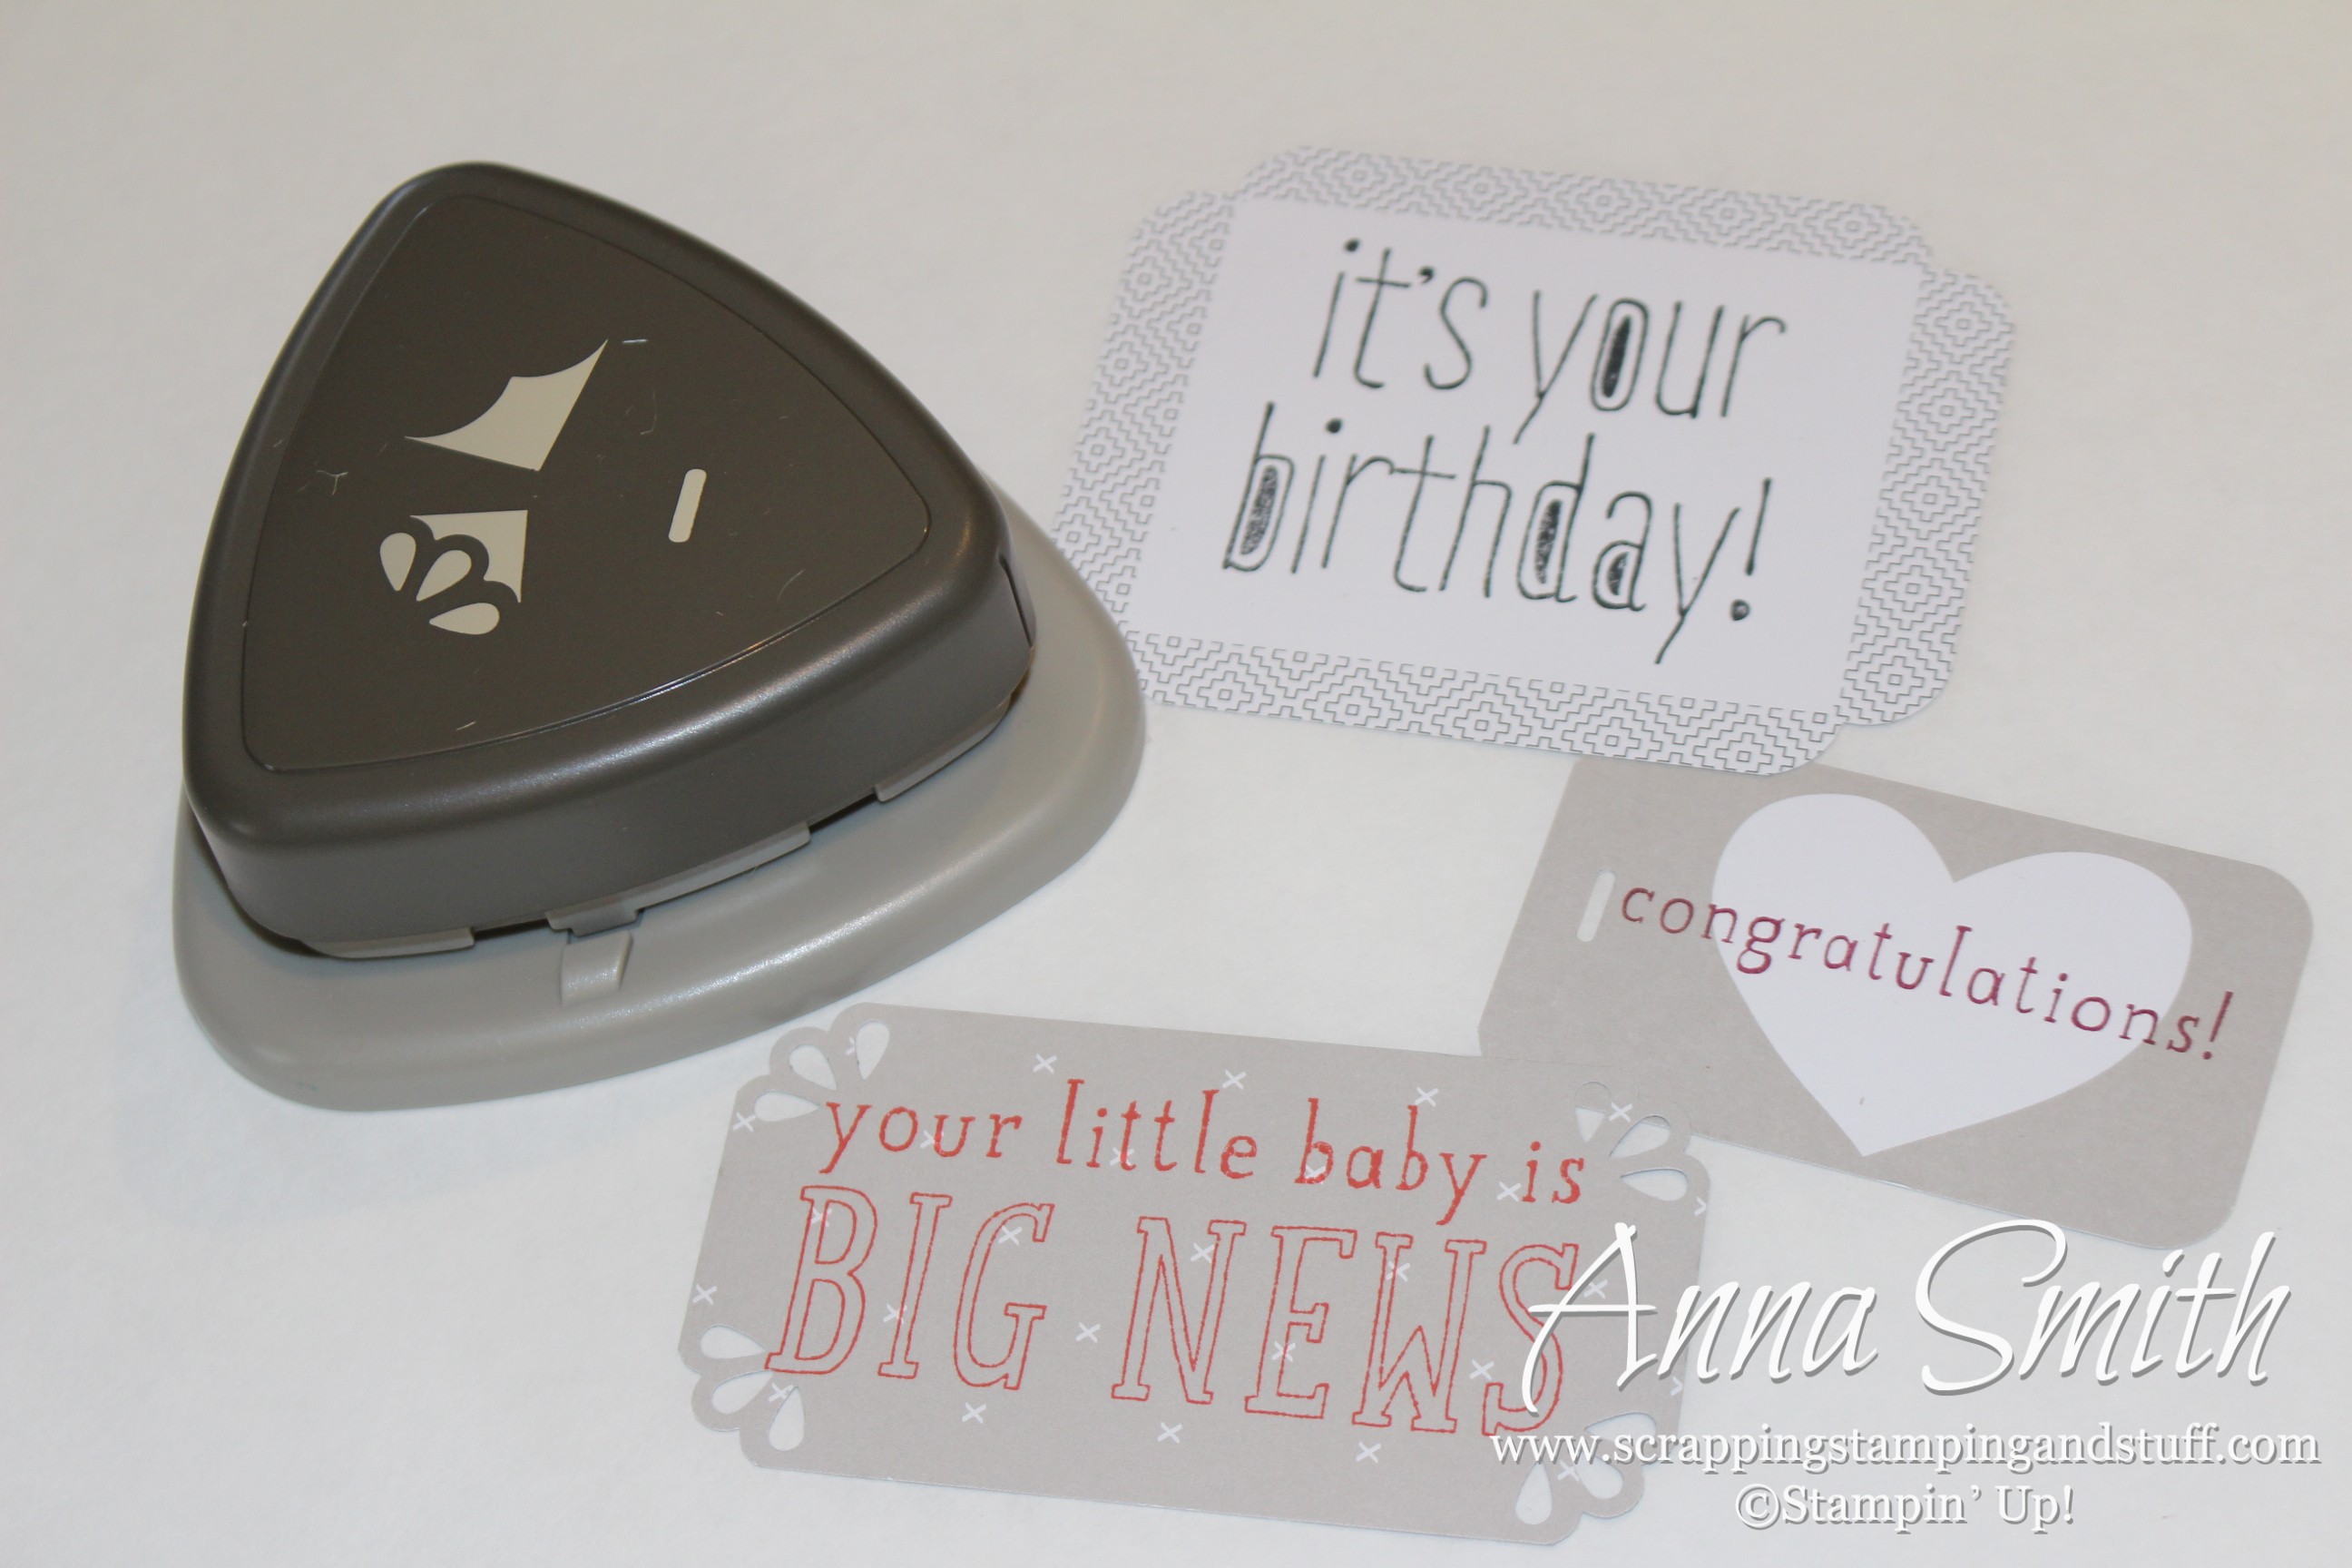 Stampin' Up! Curvy Corner Trio Punch - Make tags and labels in any size you want!